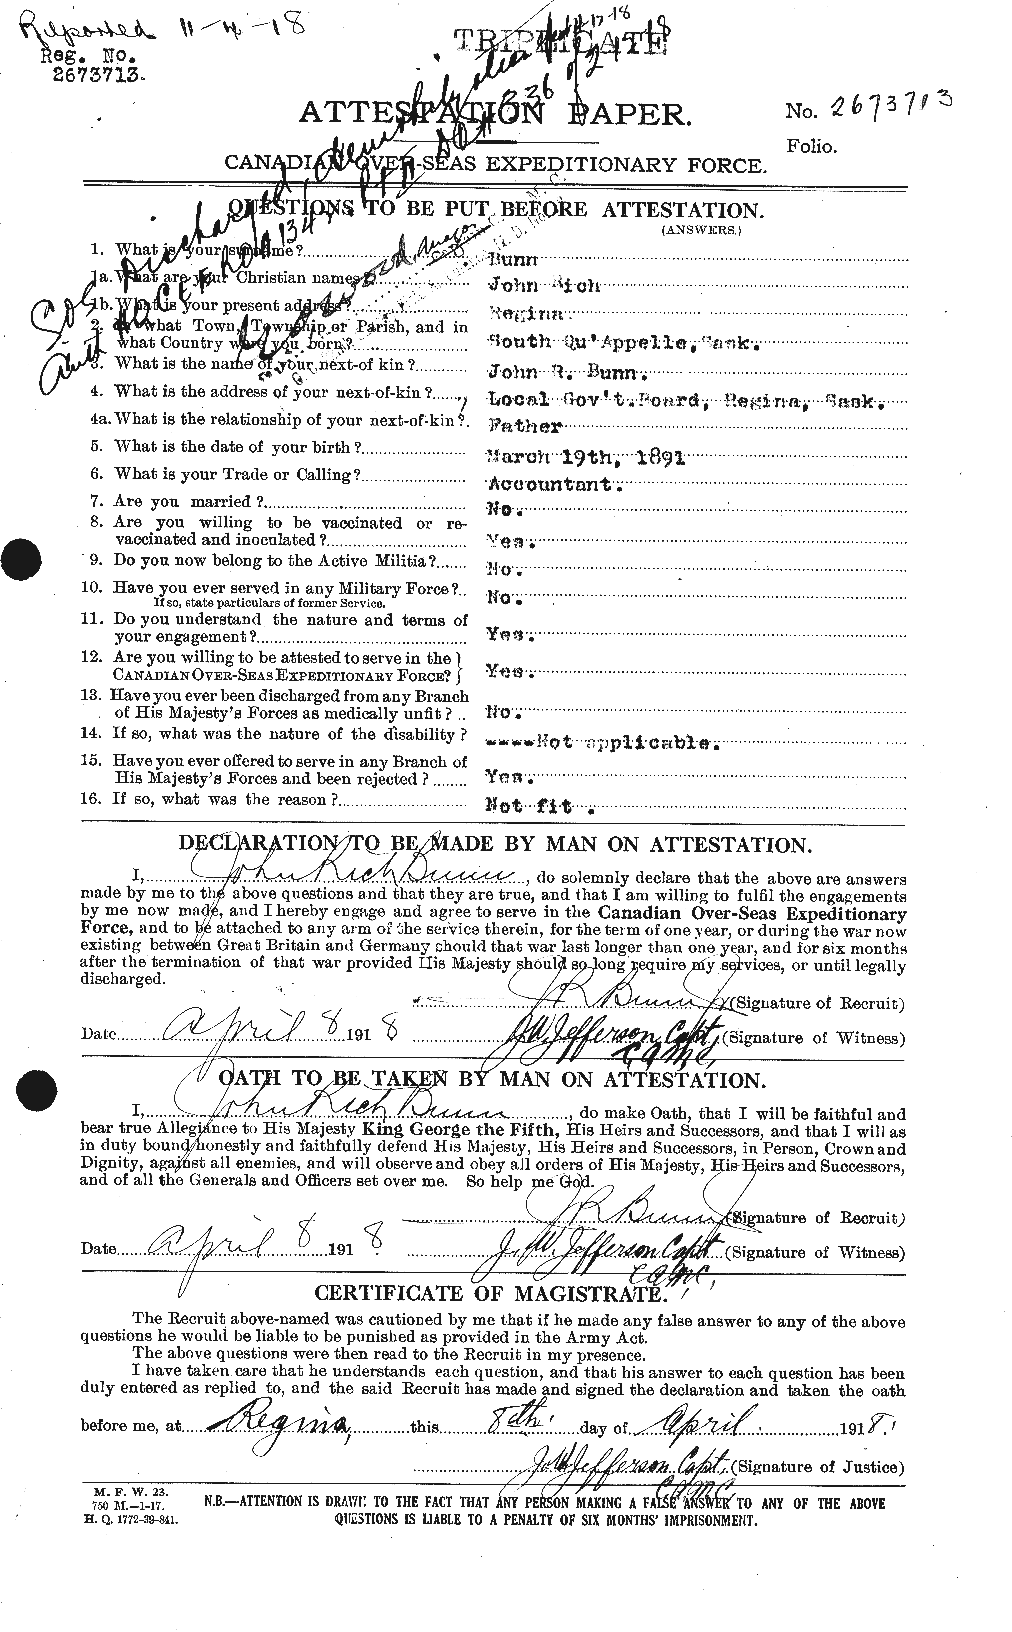 Personnel Records of the First World War - CEF 270420a